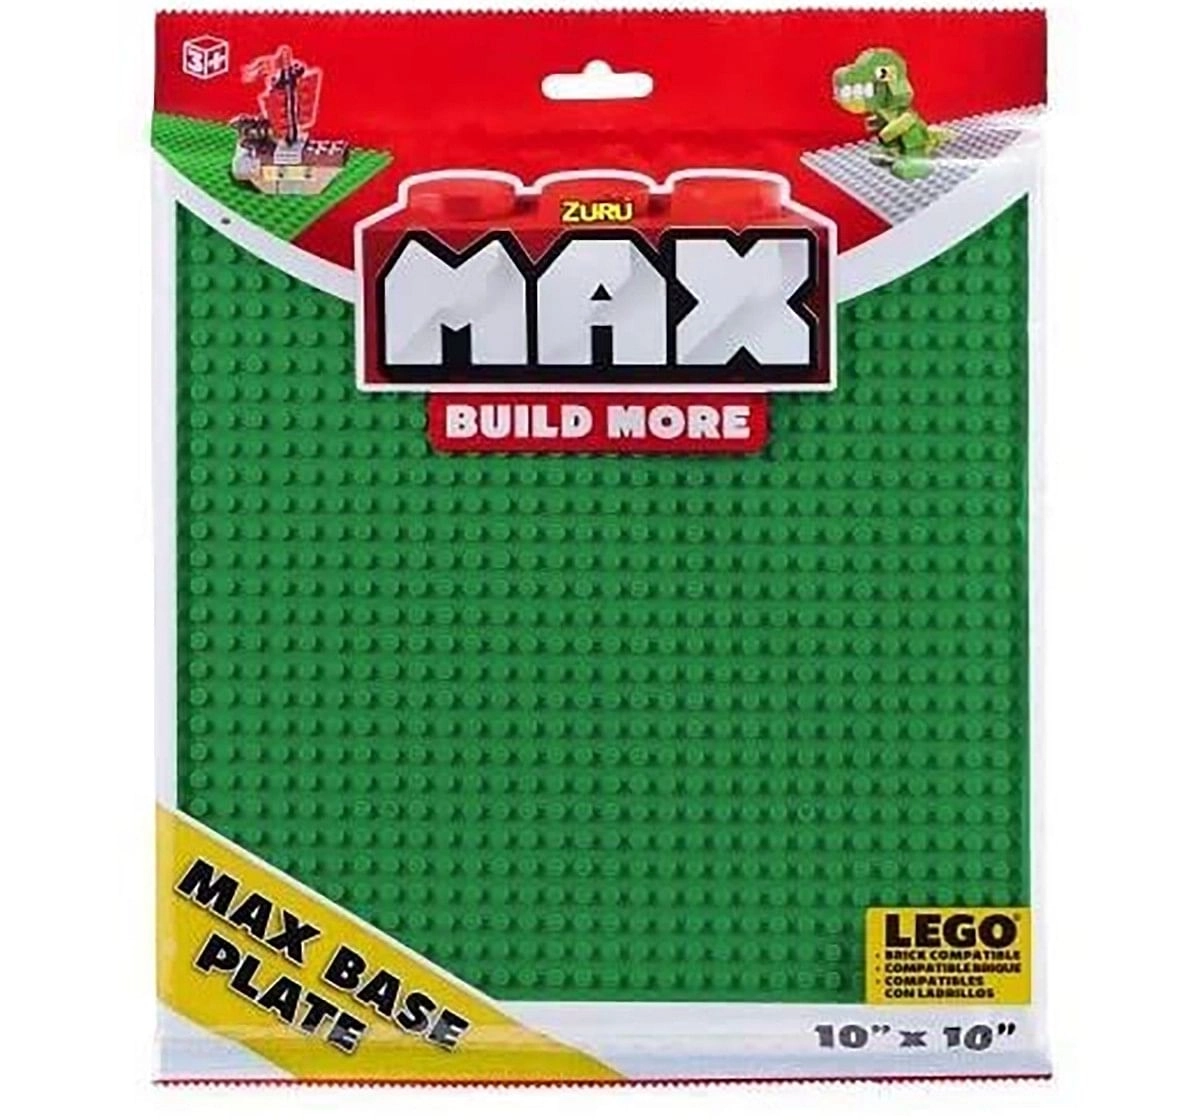 Zuru Max Build More Base Plate - Green & Grey - Color May Vary Generic Blocks for Kids age 3Y+ 